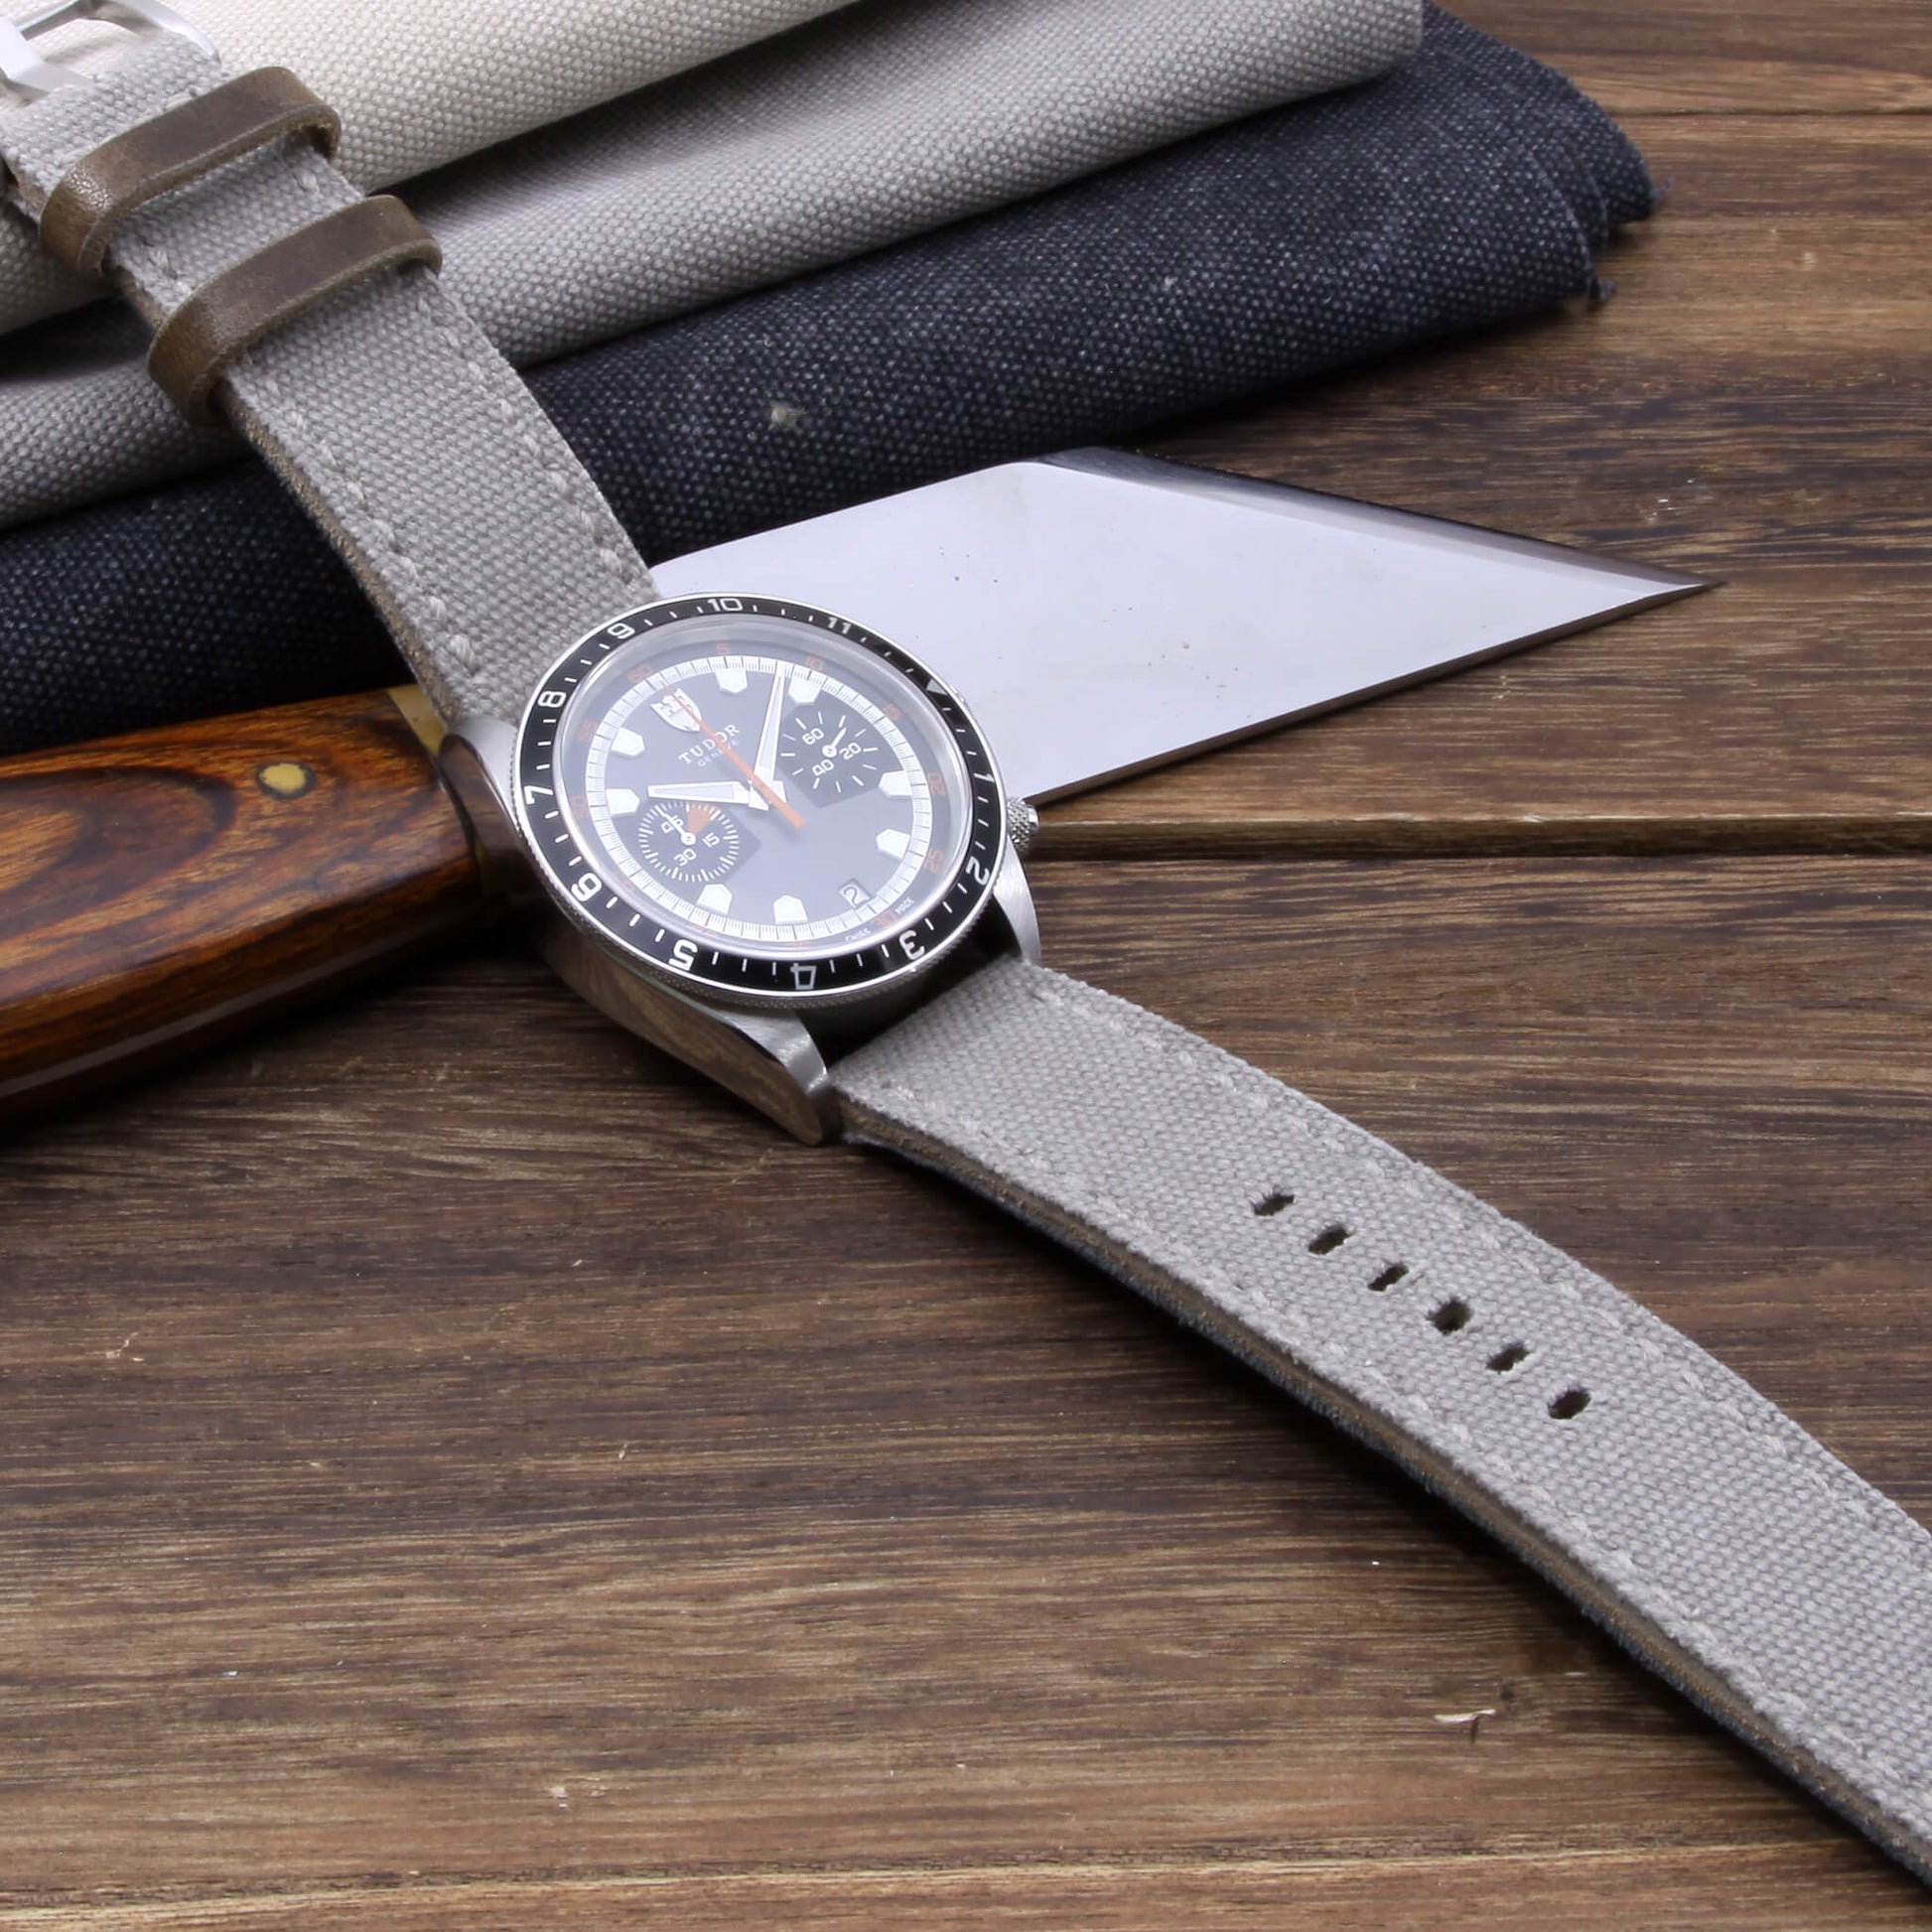 5th View of 2-Piece Full Stitch Leather Watch Strap, made with Grey Canvas and Italian veg-tanned leather lining, handcrafted by Cozy Handmade